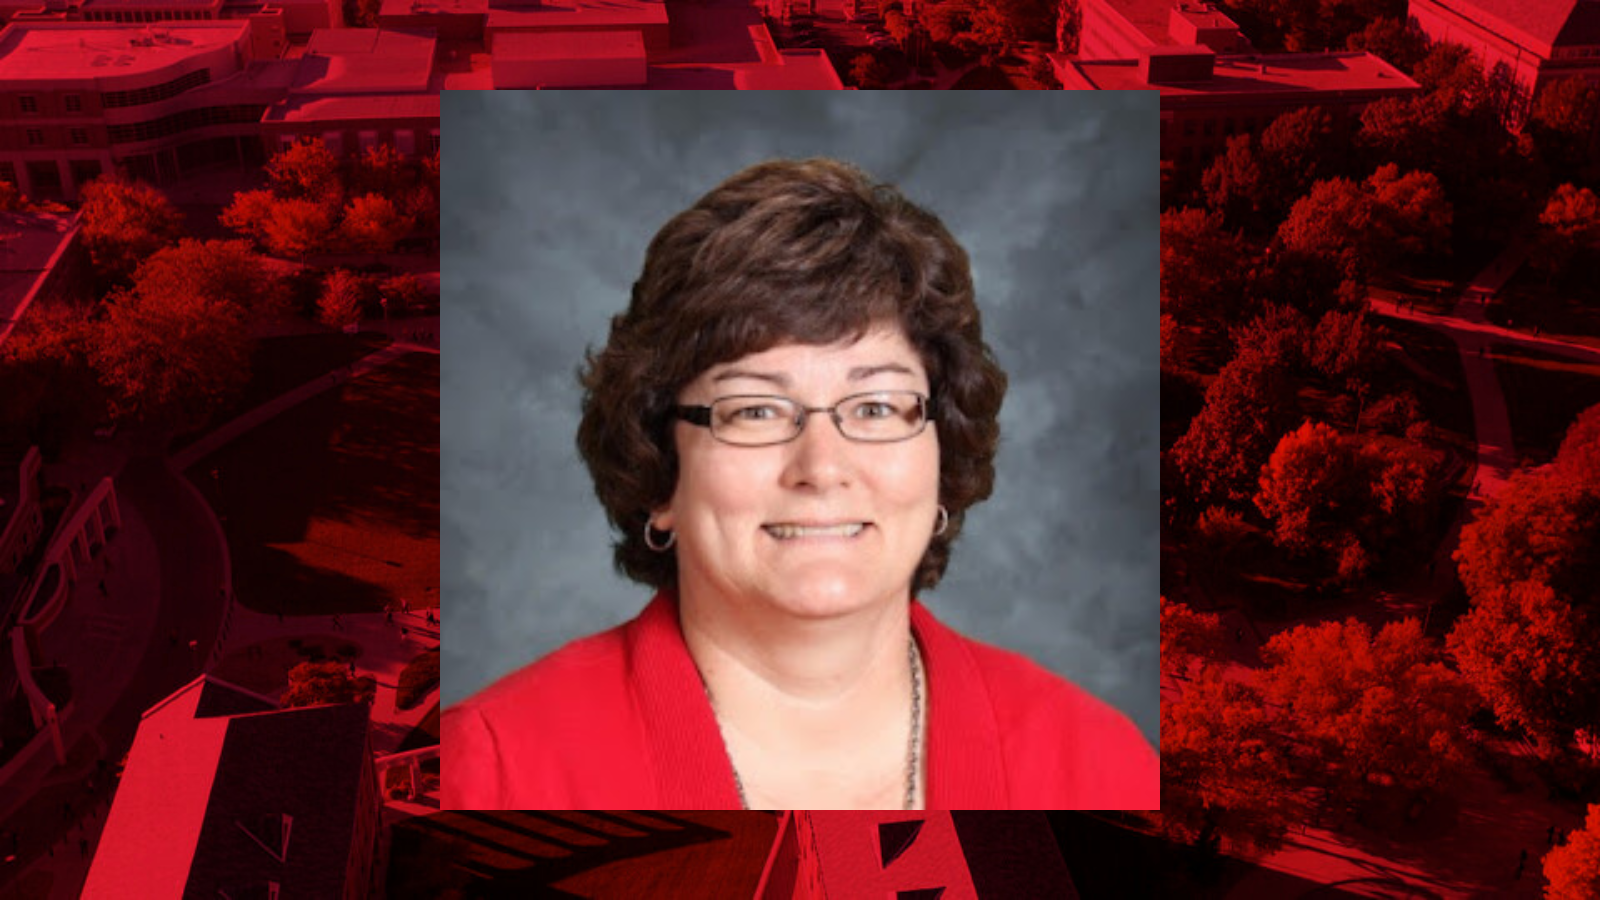 Professional headshot of Patricia Hinkle placed on a red background